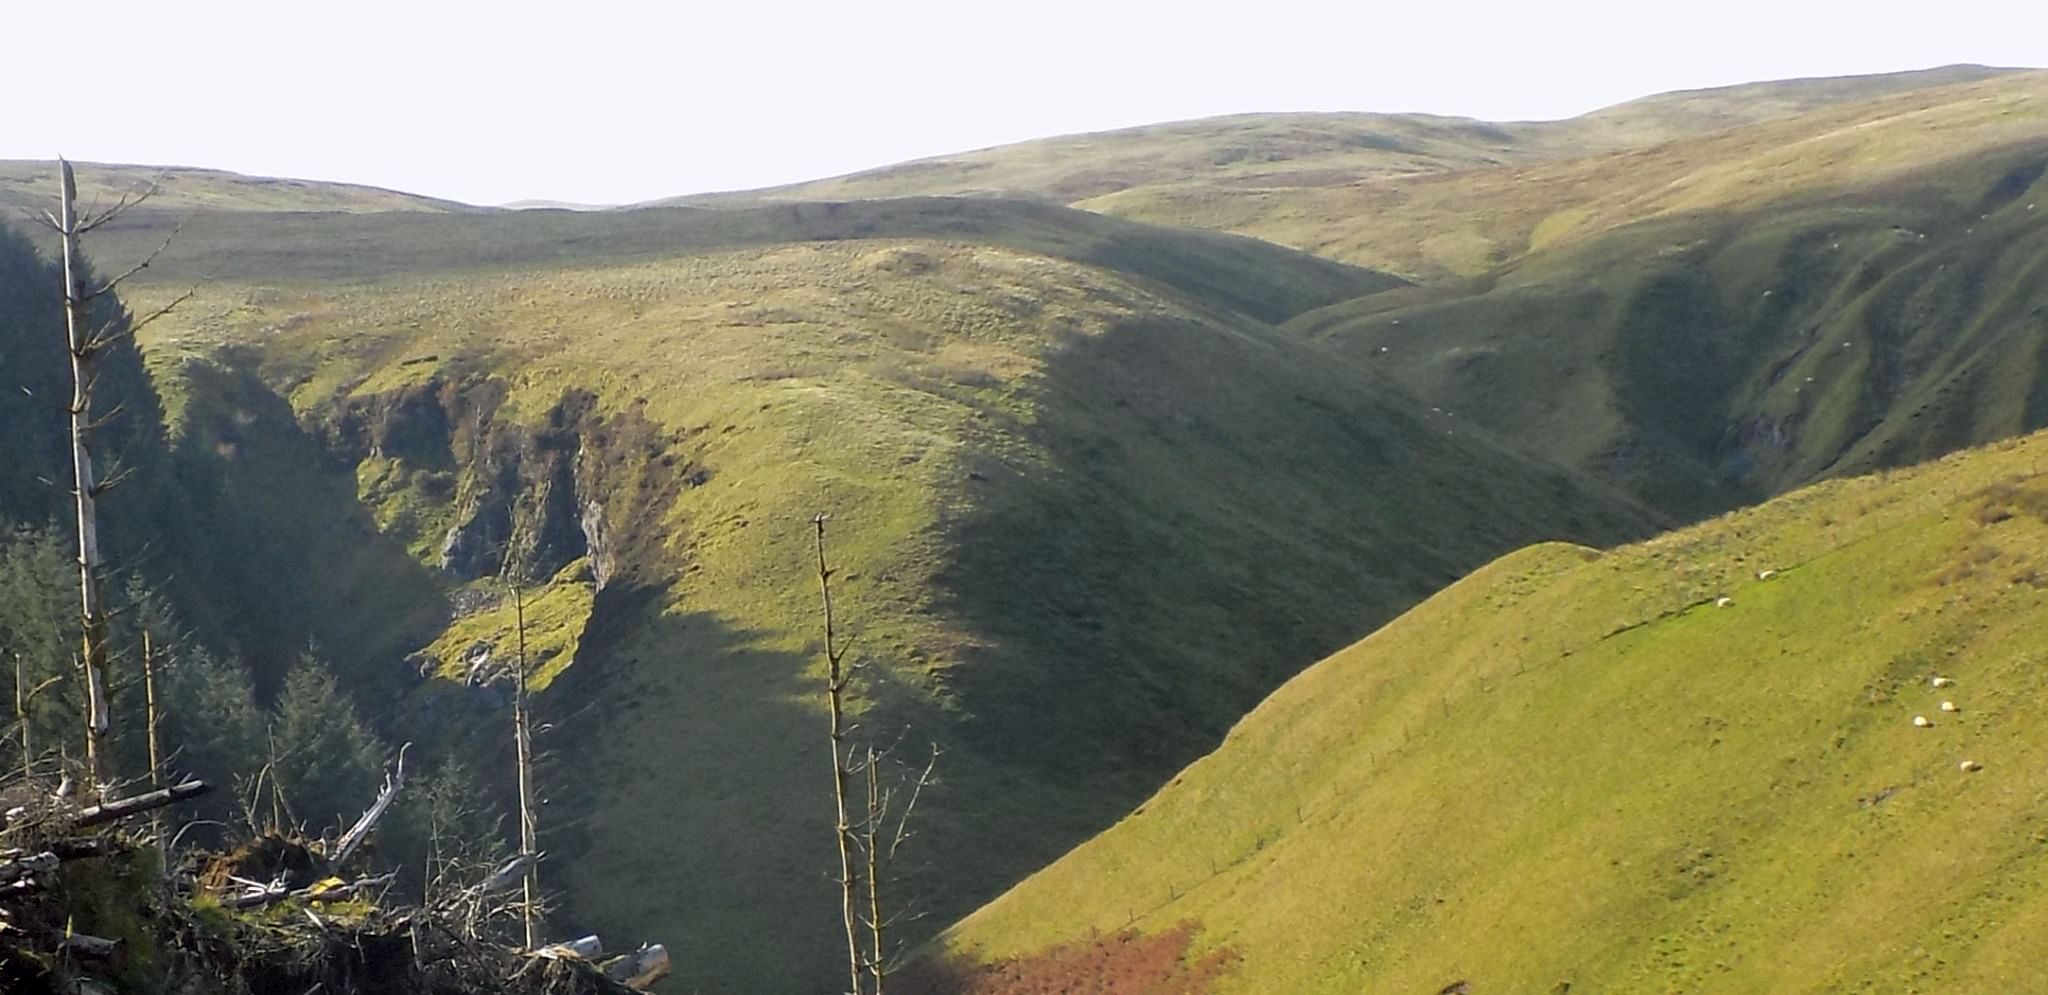 Rock face above Hole of Kailrine at head of Gonachan Burn in the Campsie Fells